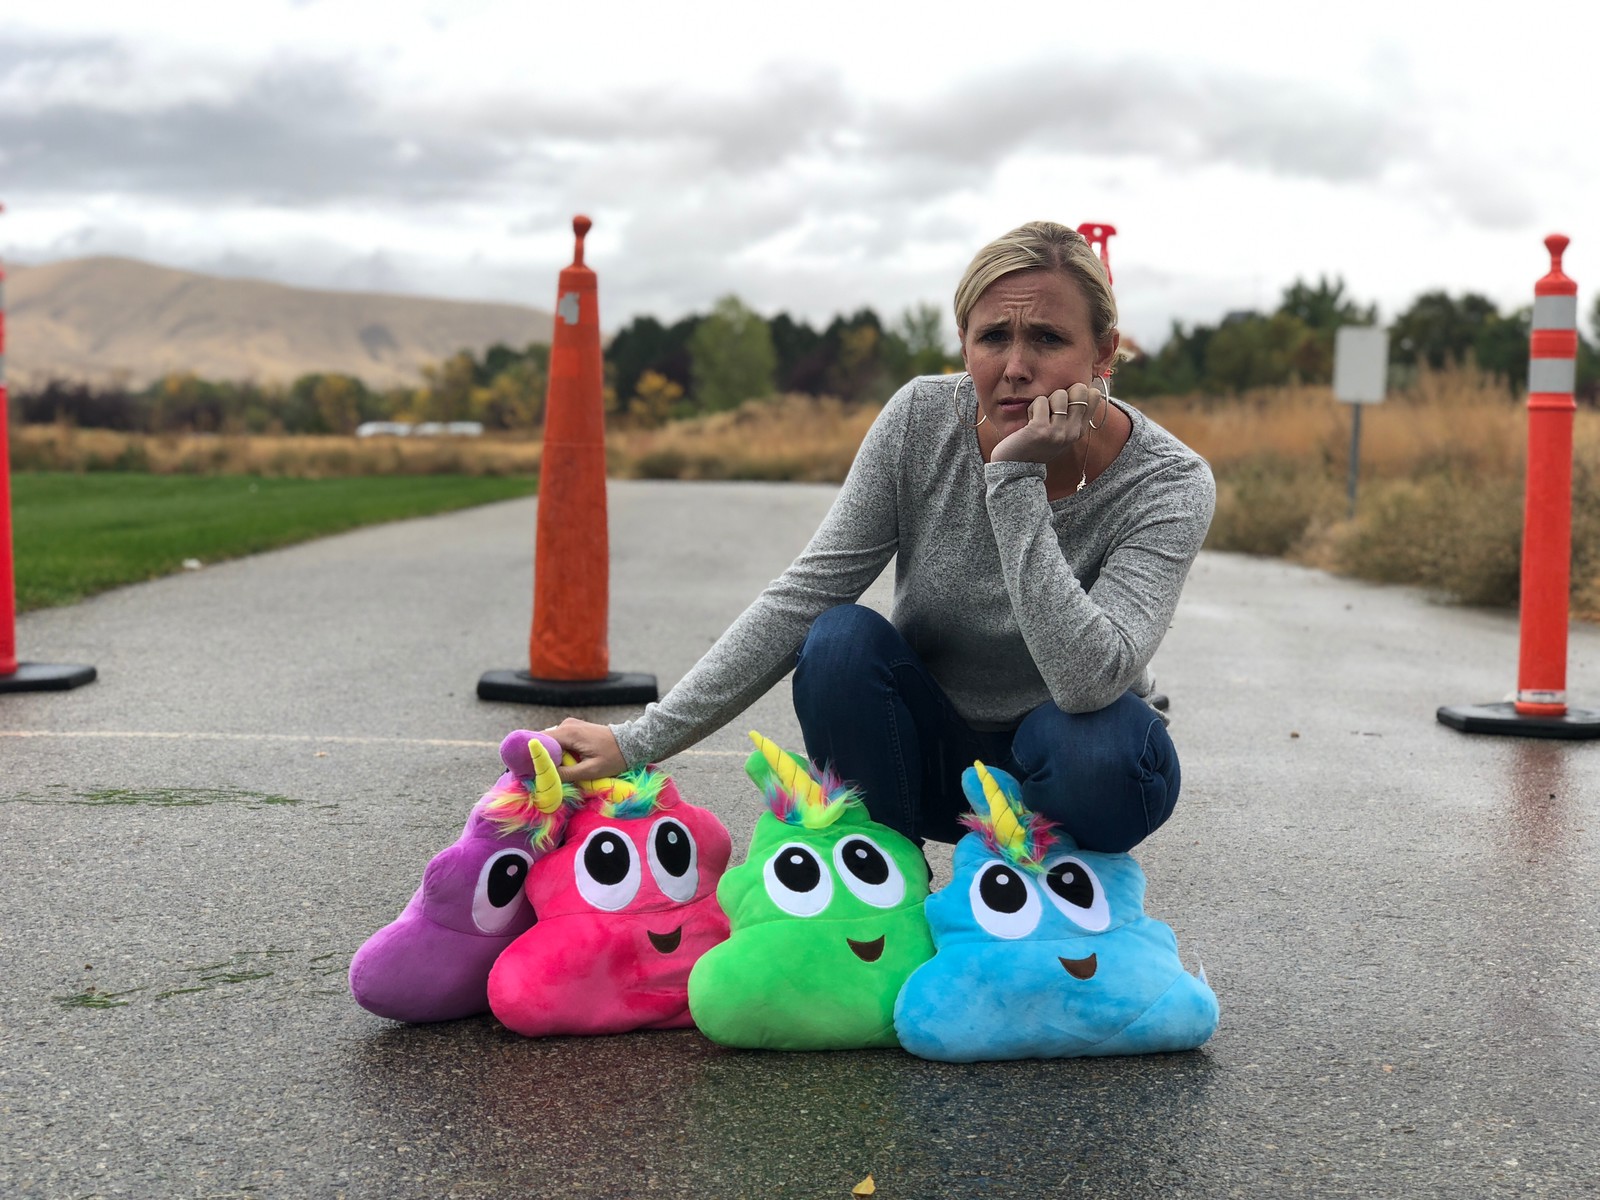 woman sitting in the road with construction cones around her and stuff poop emoji plushies